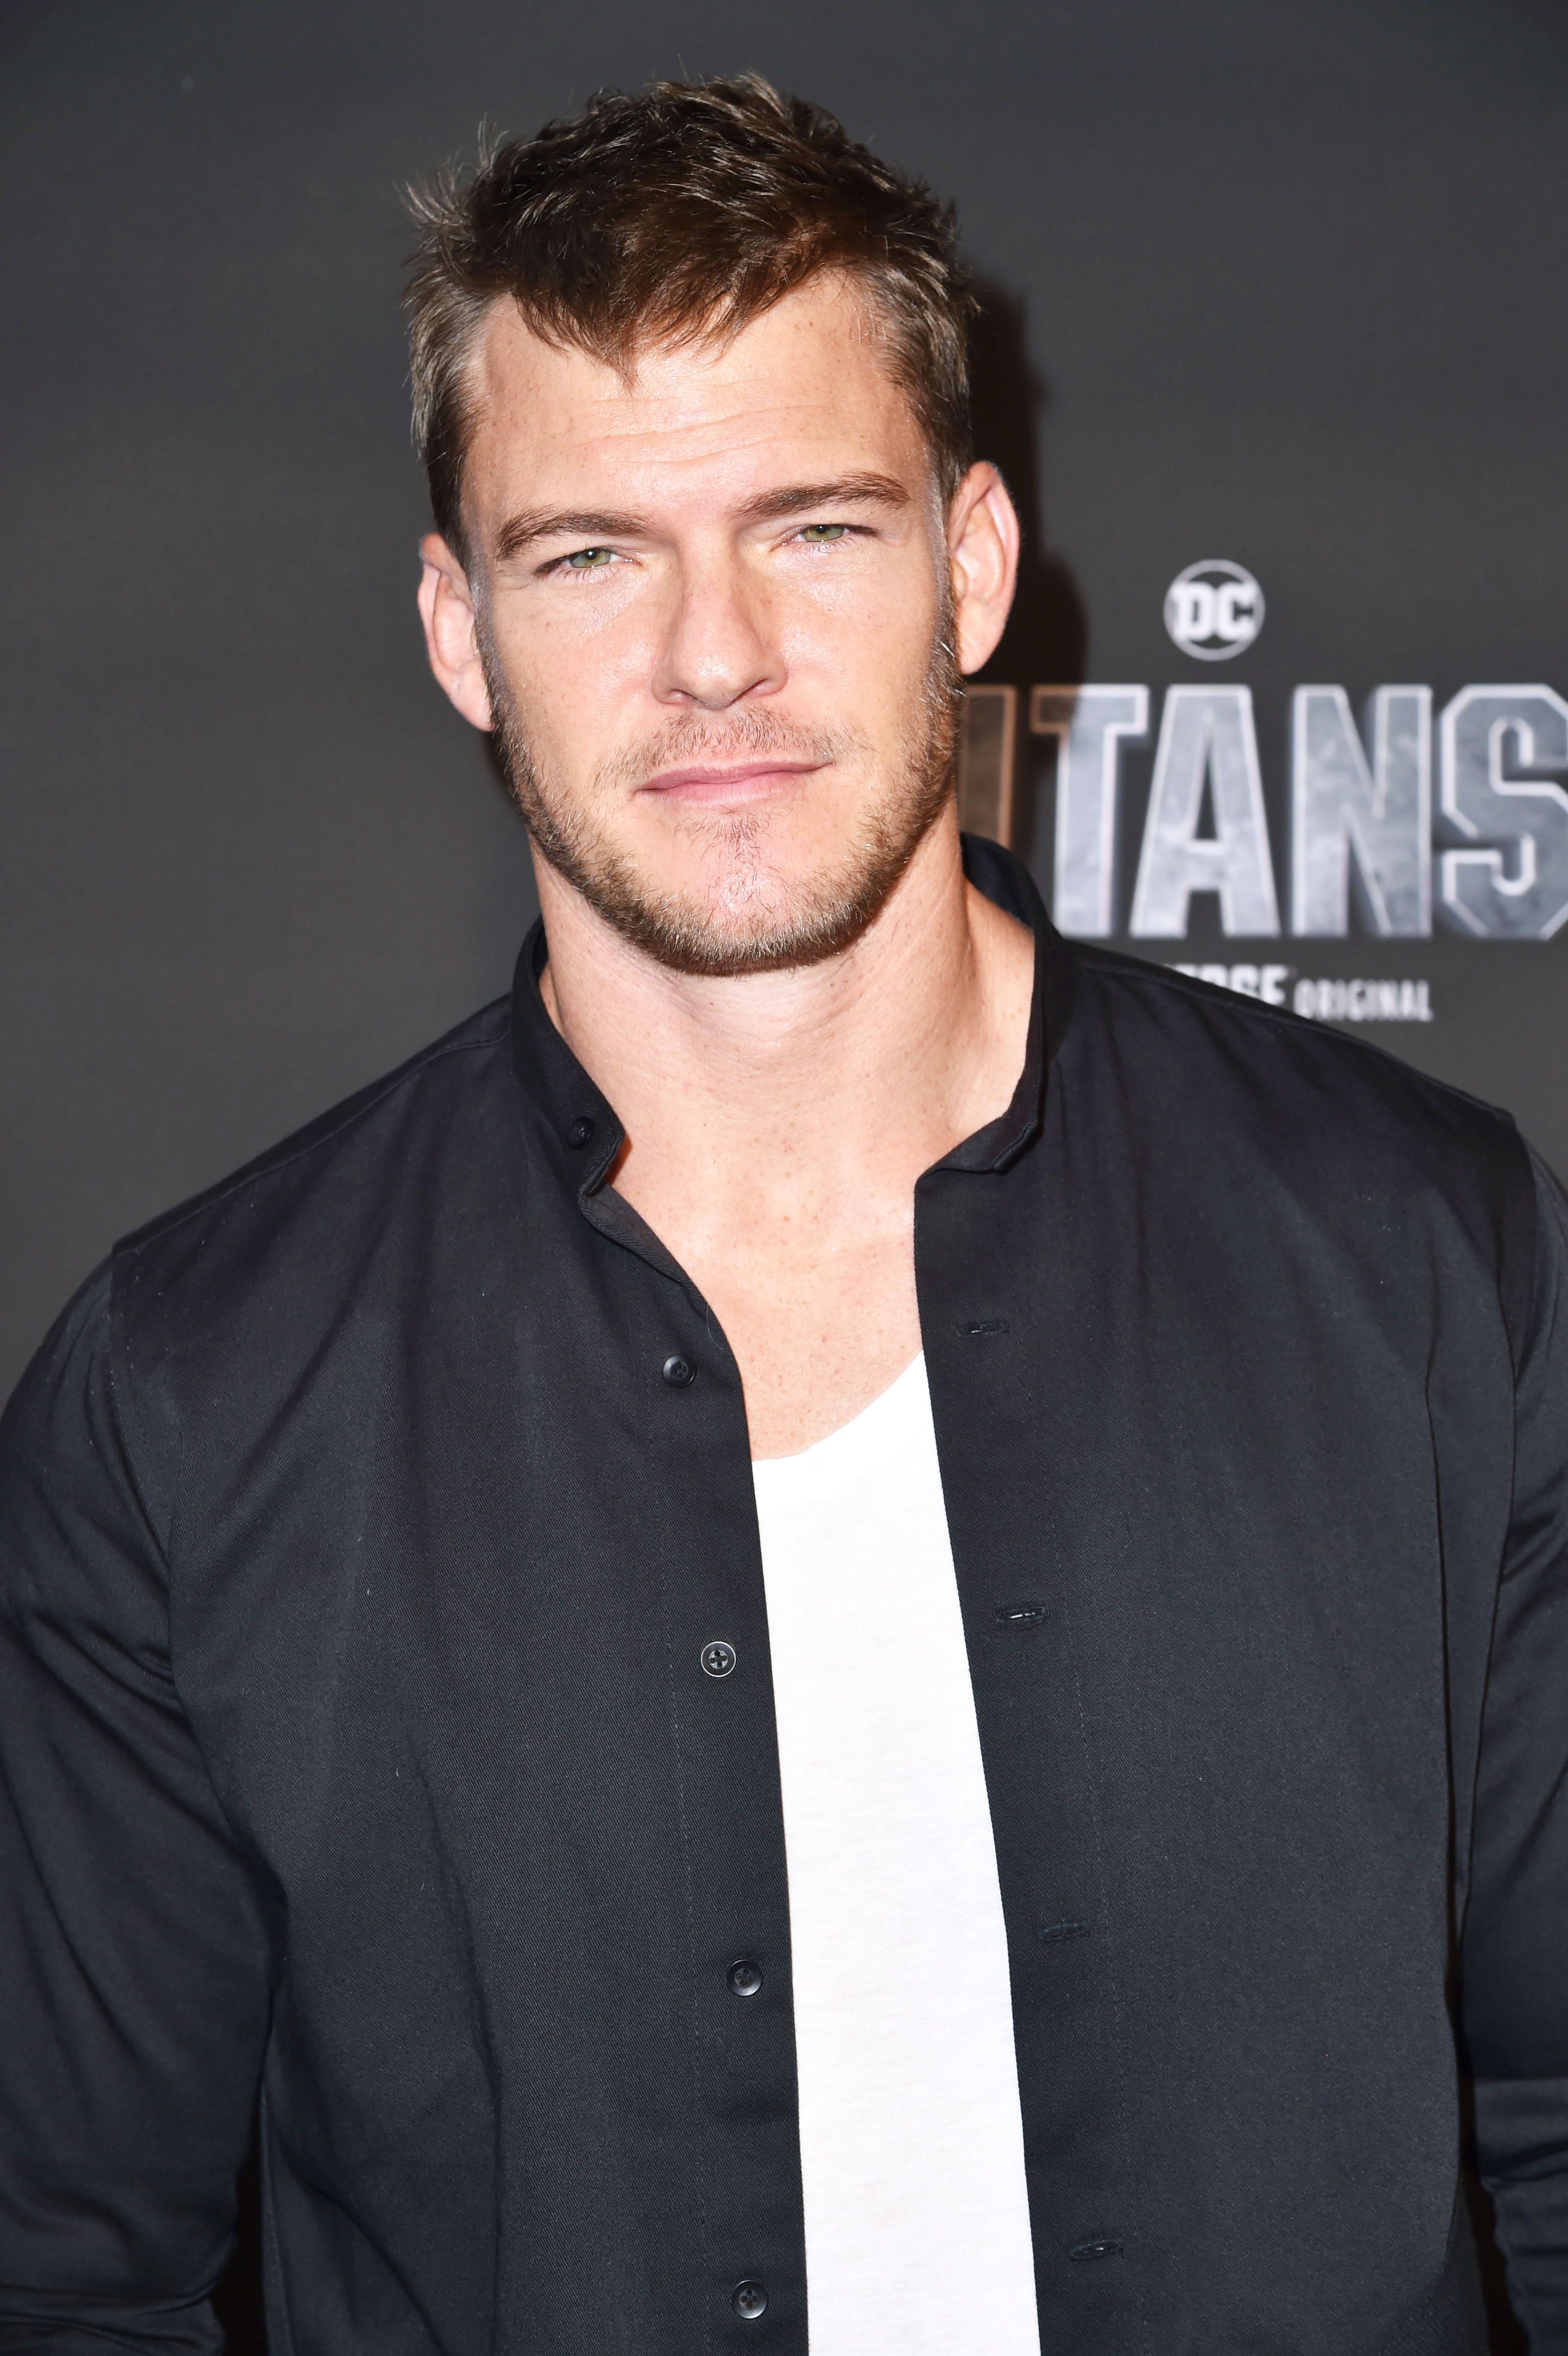 Exclusive Interview: 'Thad Castle' aka Alan Ritchson - BMS The Movie!